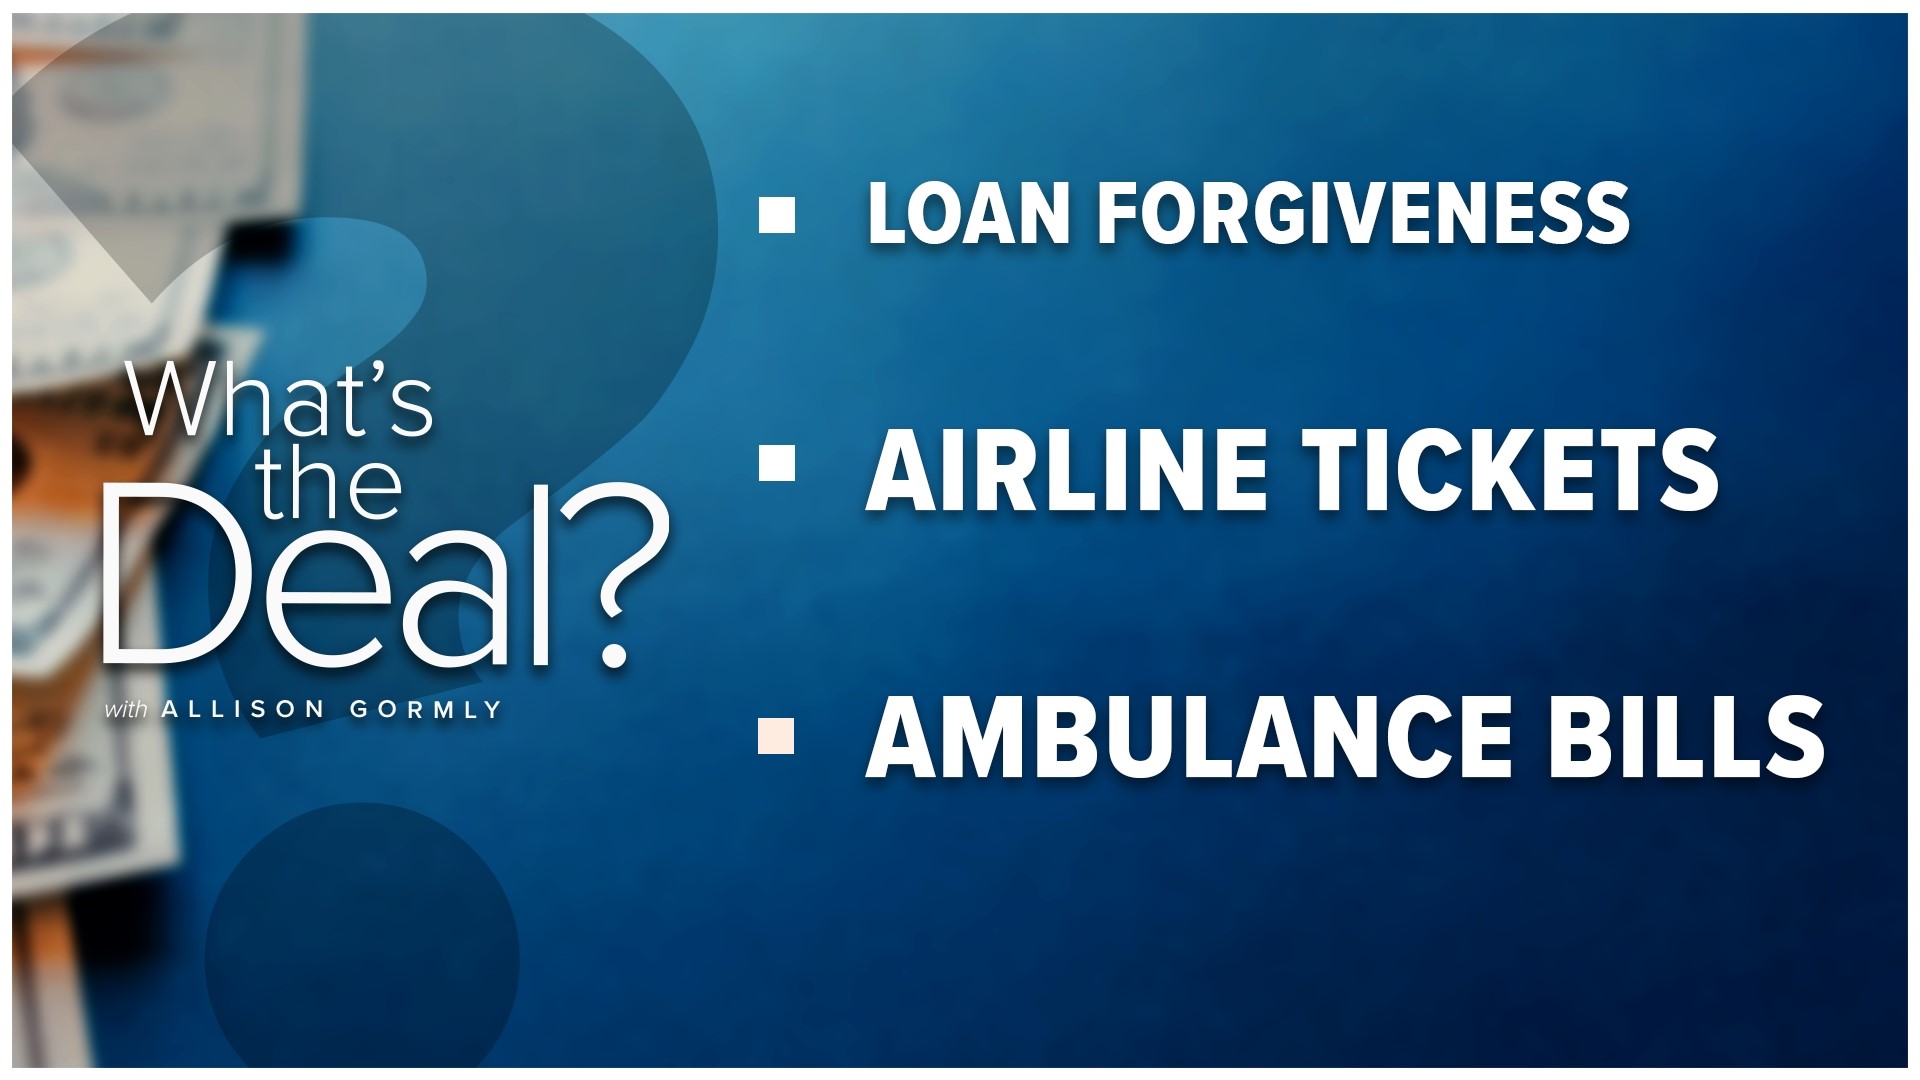 Explaining what you need to know about student loan forgiveness and how long you have to apply. Plus how to save on flights and the cost of ambulance bills.